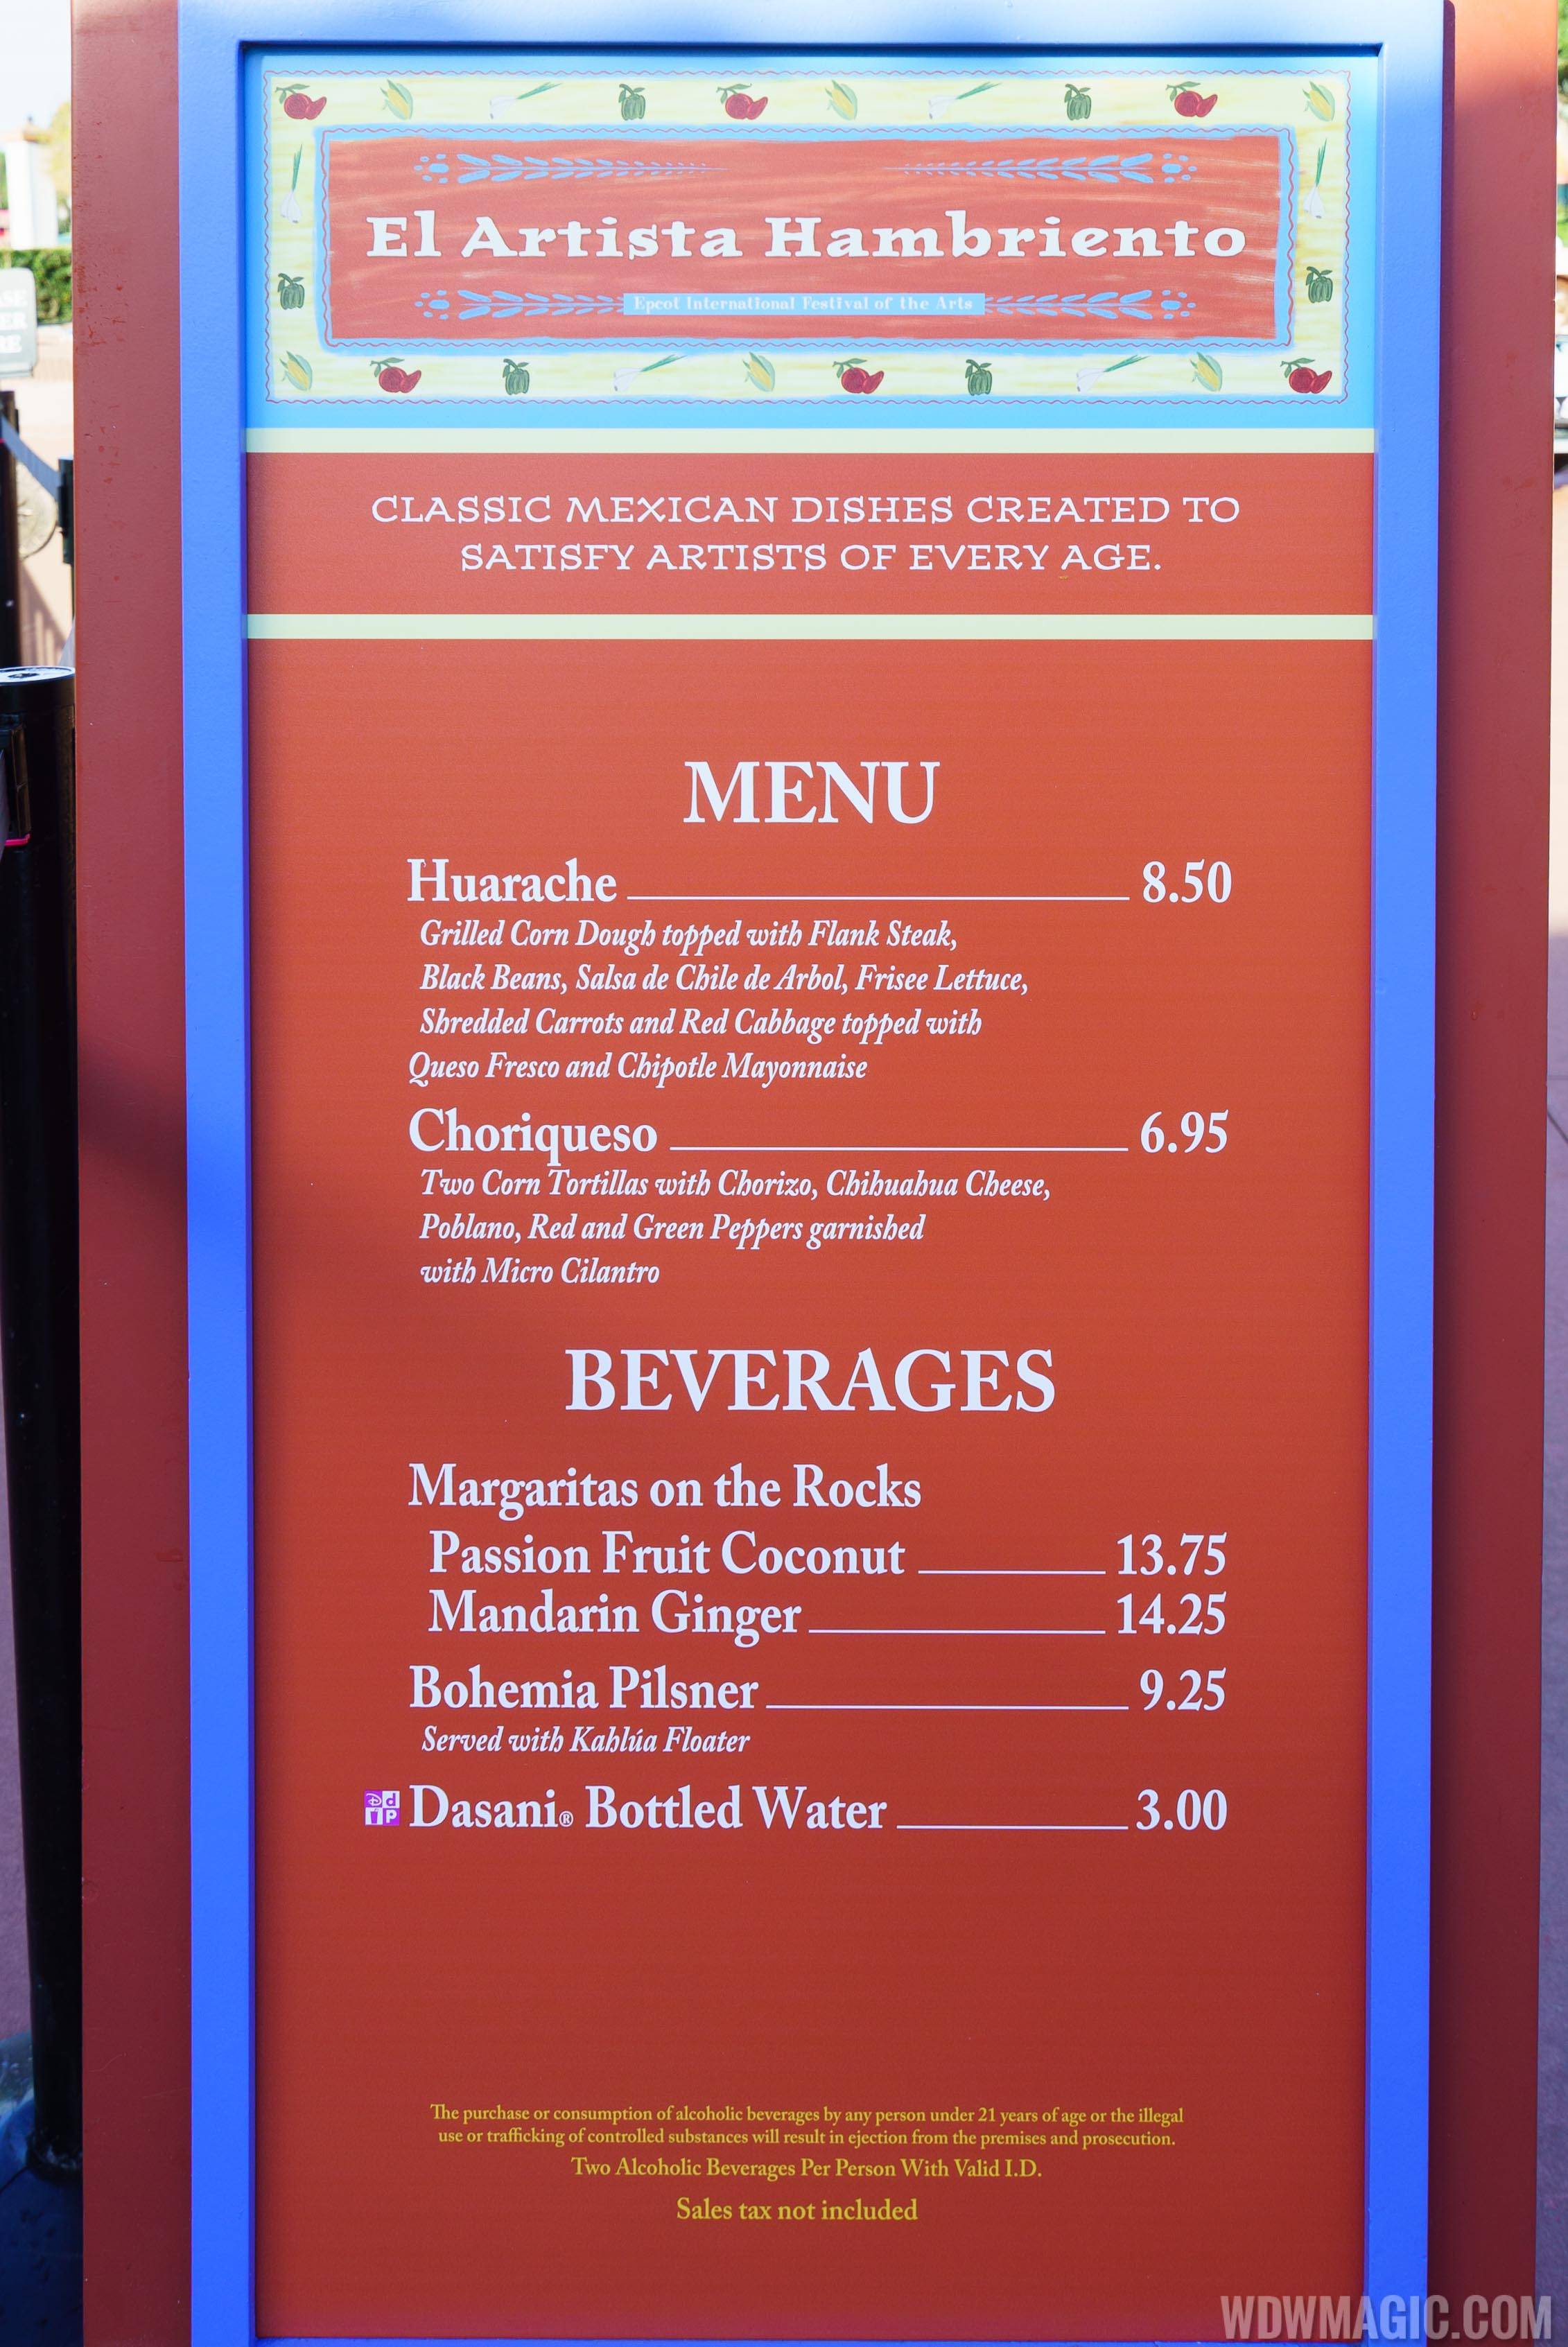 Epcot Festival of the Arts - The Hungry Artist menu